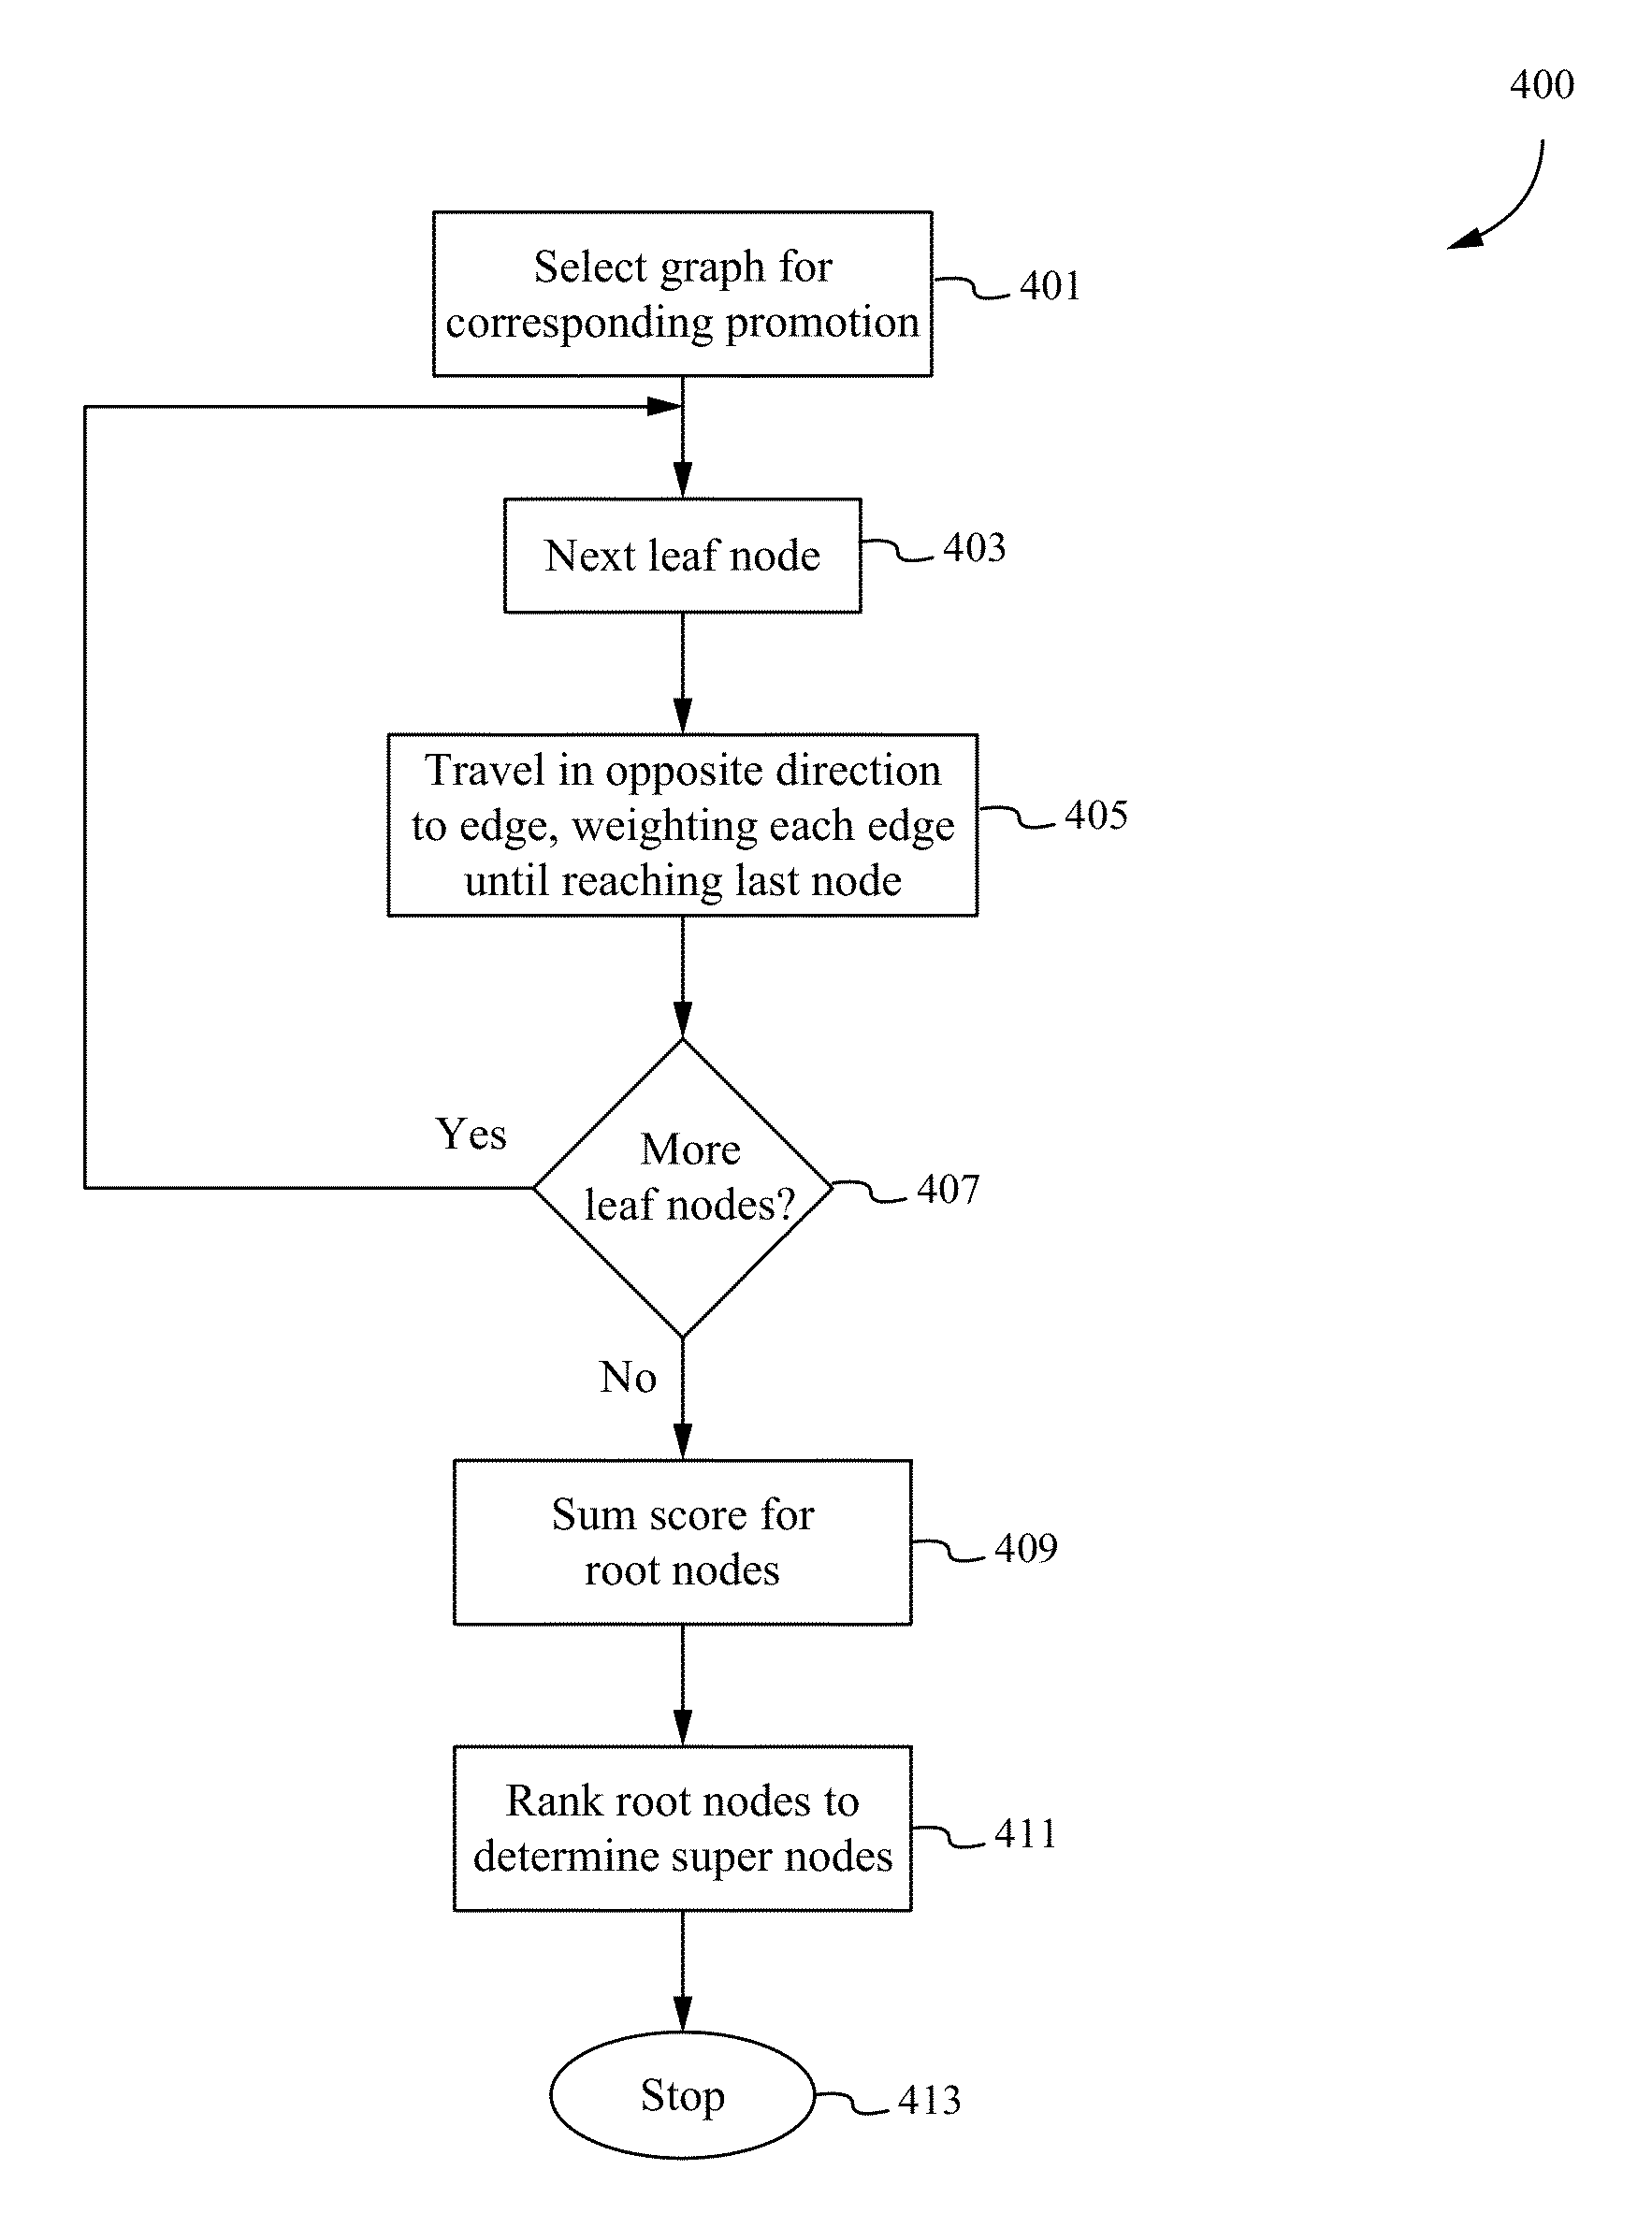 Method of constructing a loyalty graph